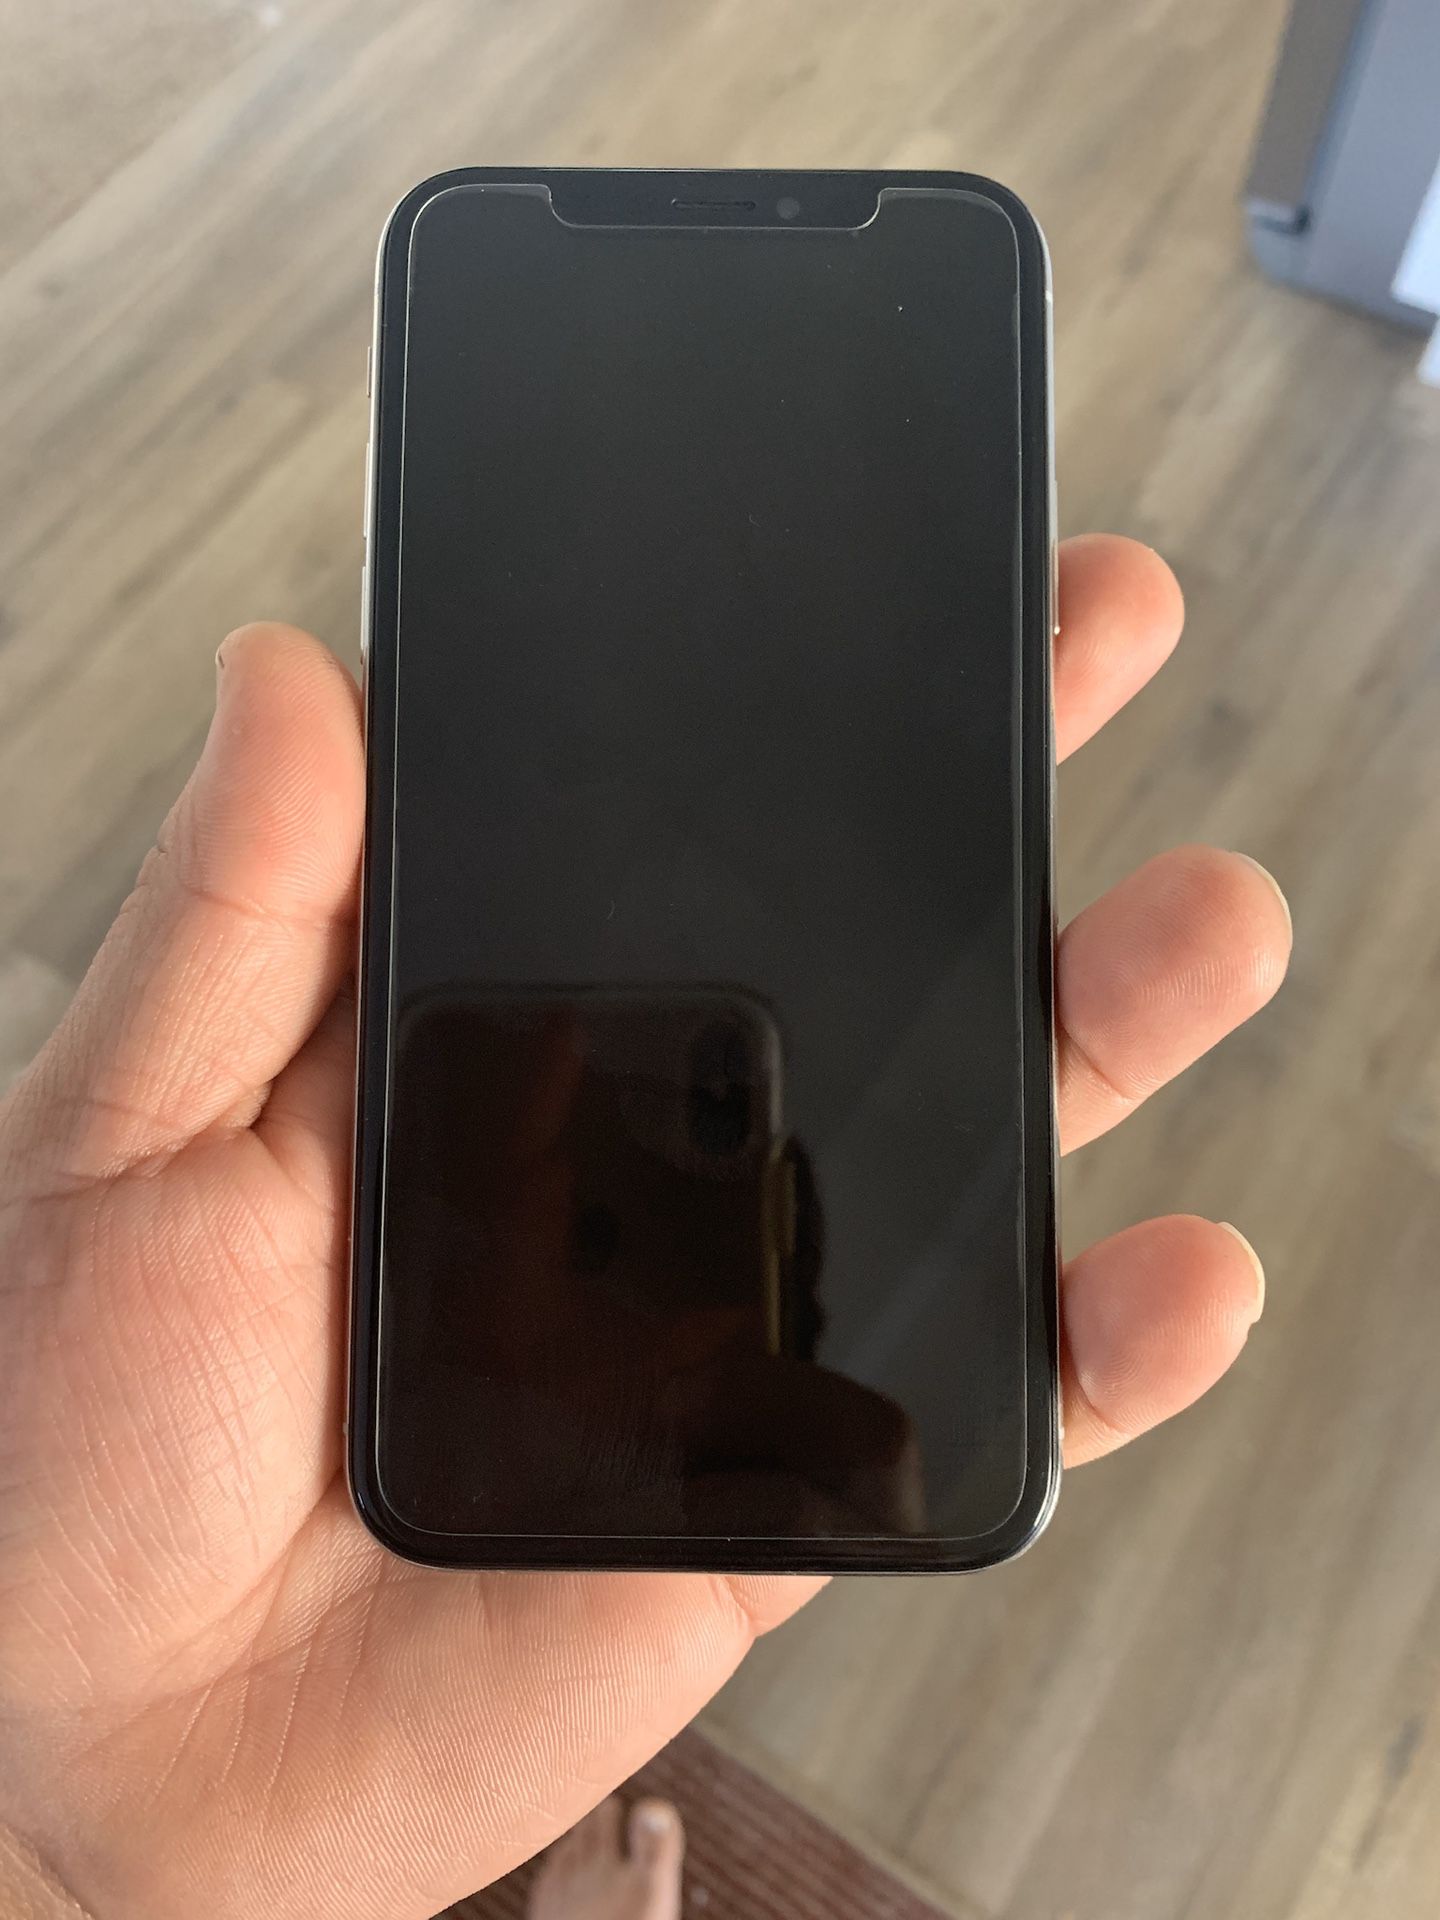 iPhone X 64 GB Unlocked for any carrier Mint Condition!